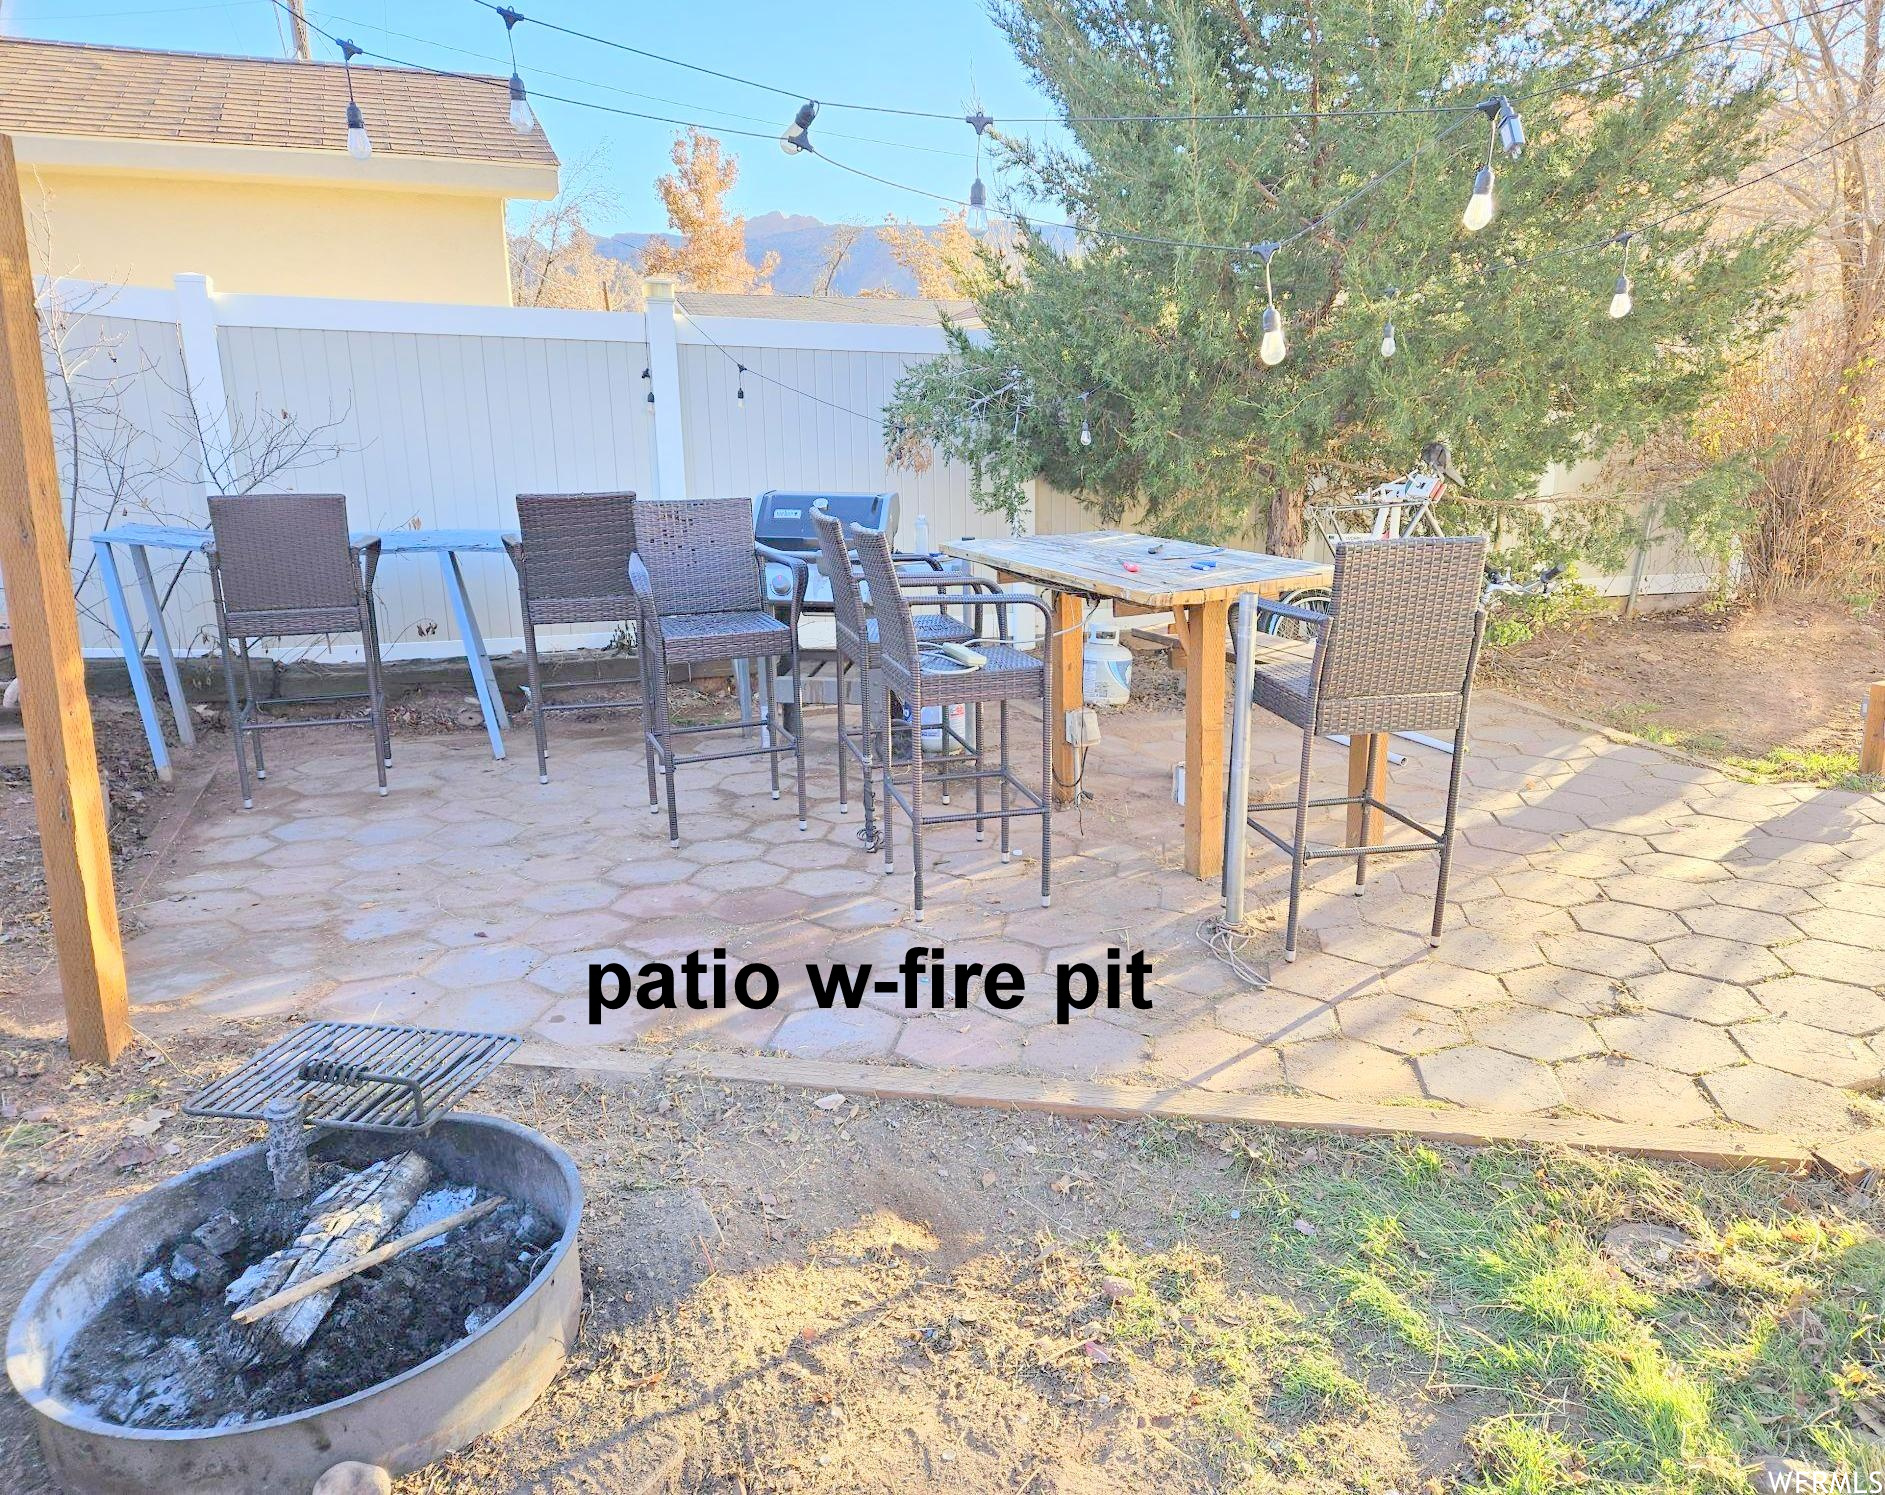 Enjoy BBQ-ing and the fire pit